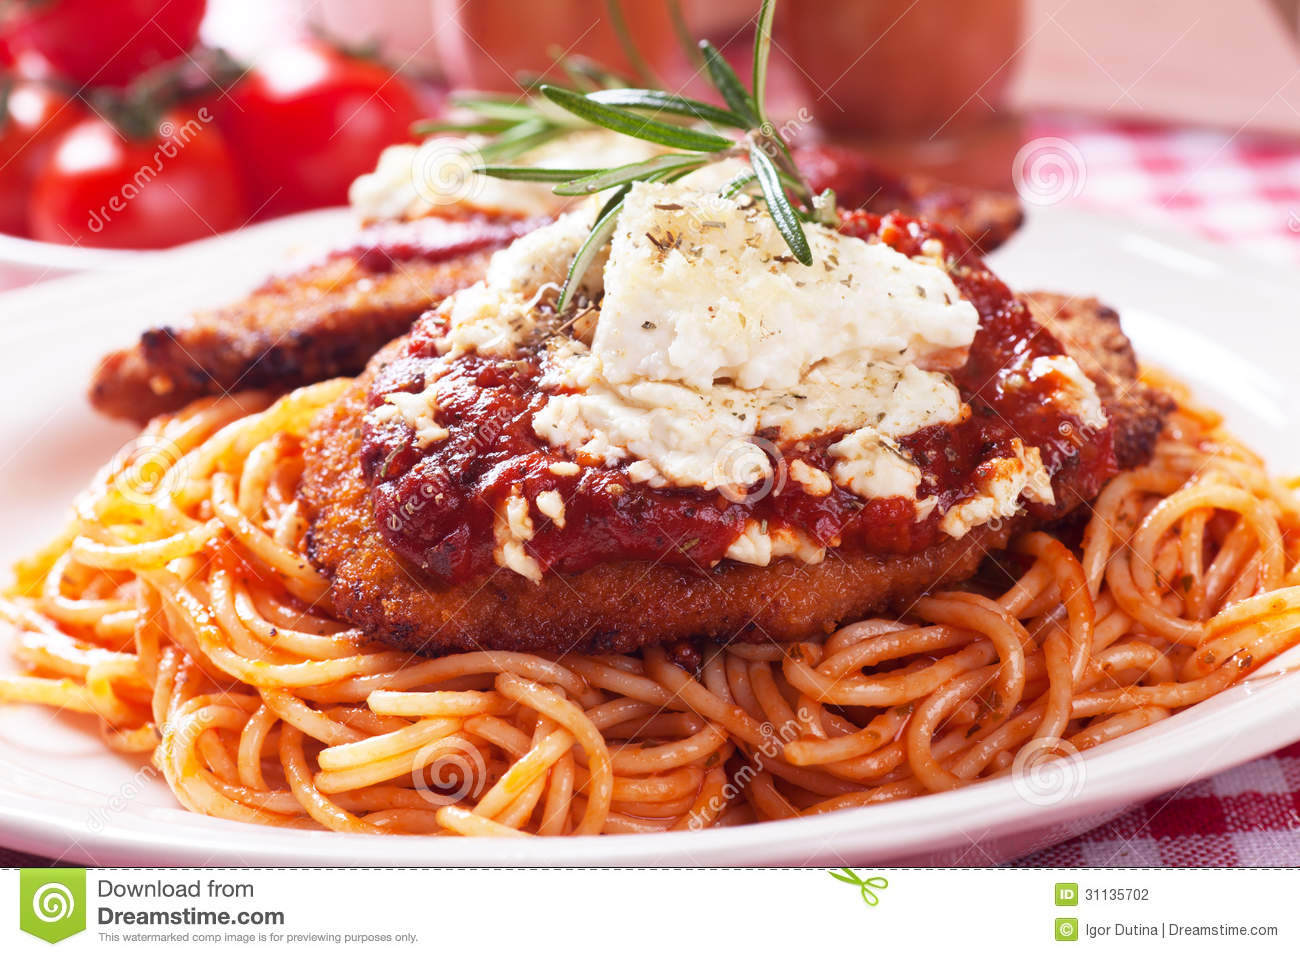 Chicken Parmesan Breaded Chicken Steak With Tomato Sauce And